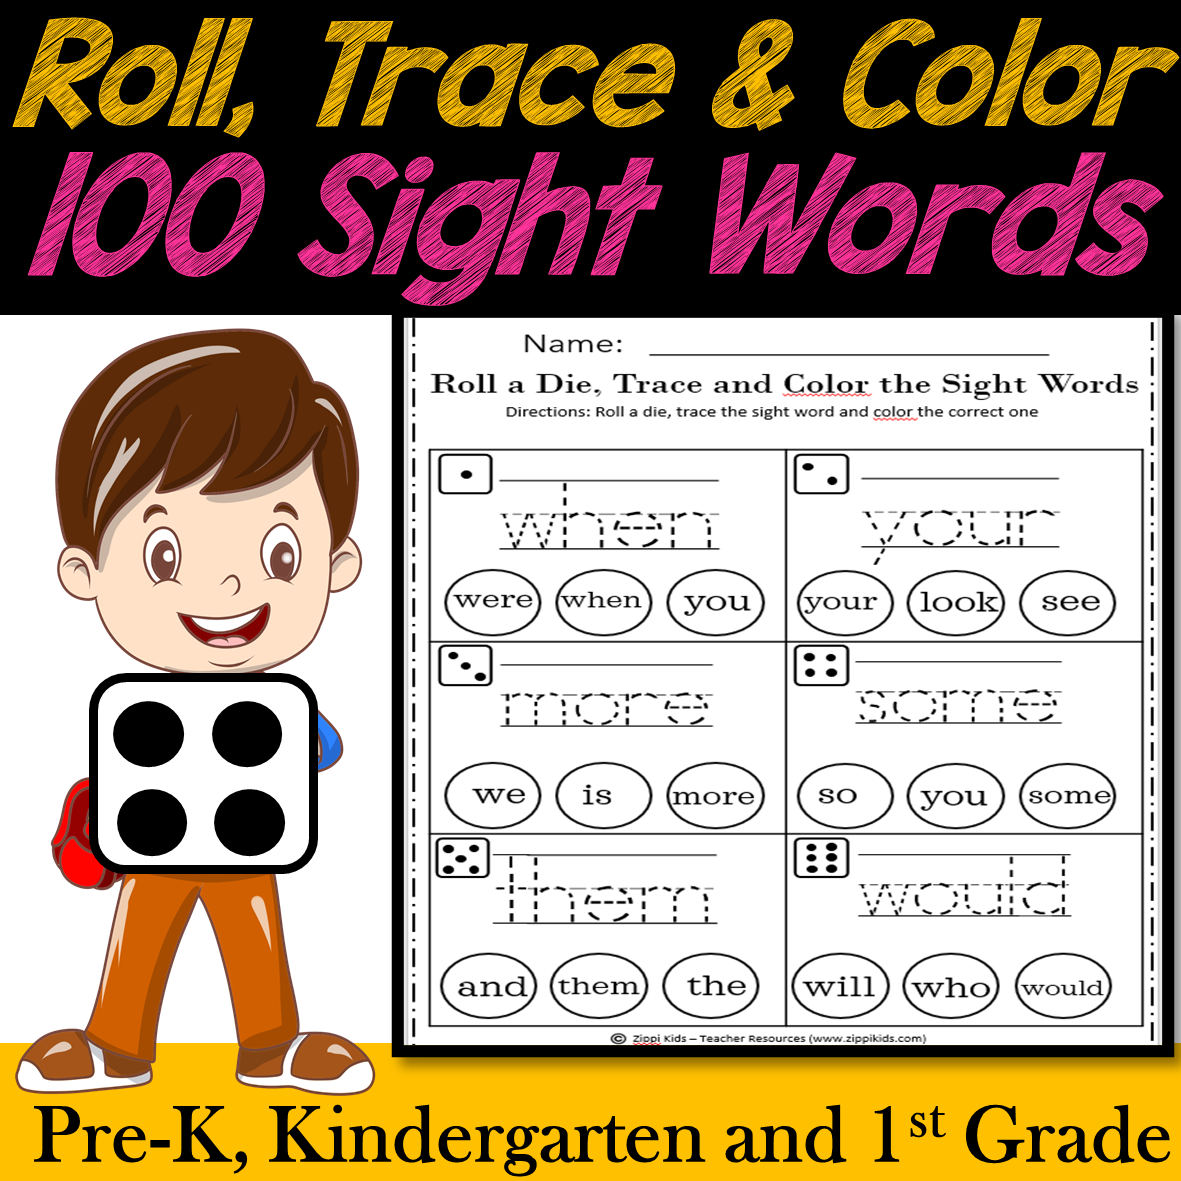 Sight Words Practice! 108 Pre-Primer and Primer Sight Words | Roll a Die &Trace